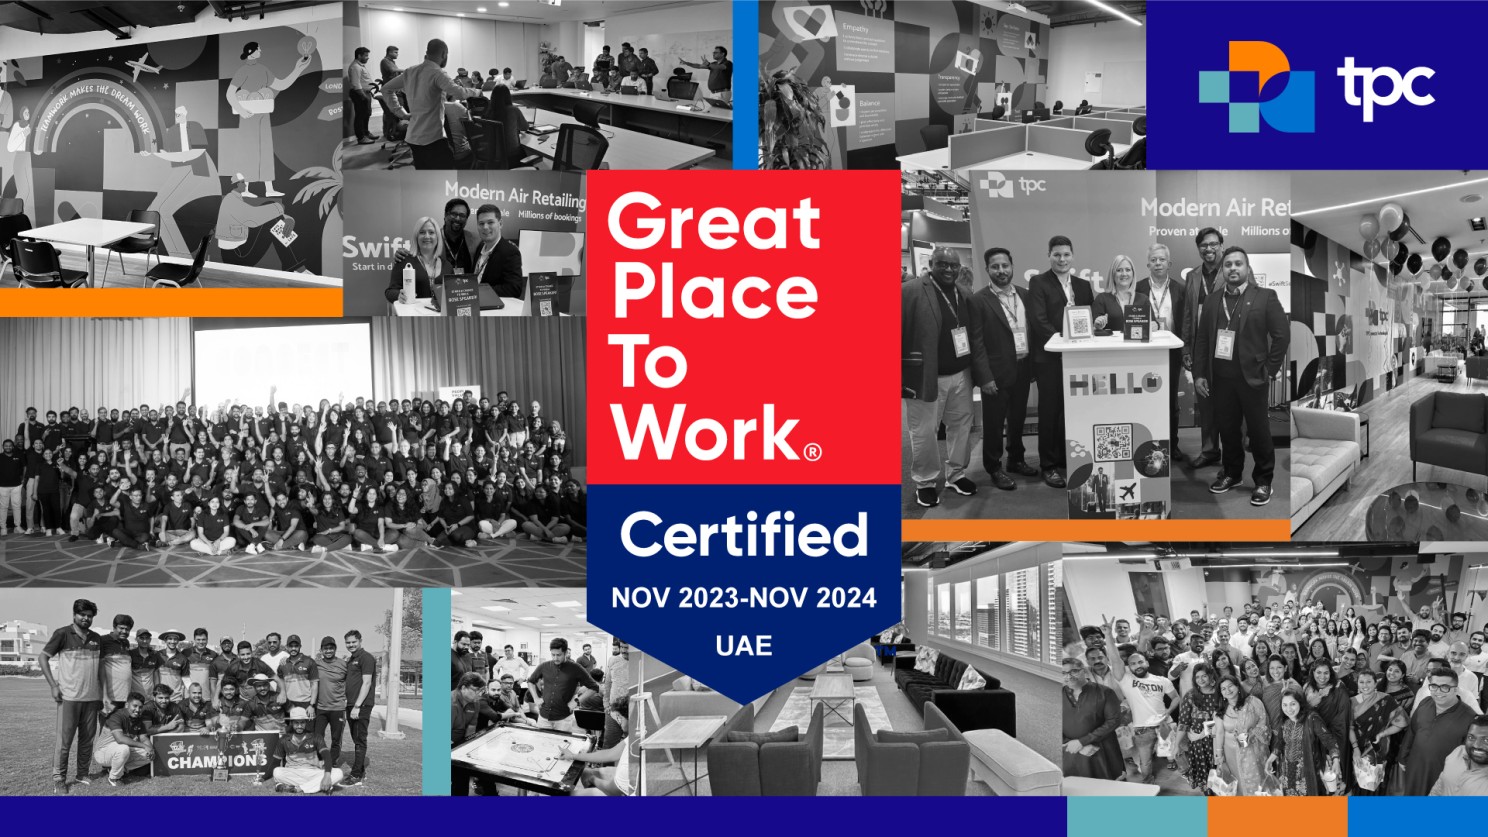 great place to work - tpconnects